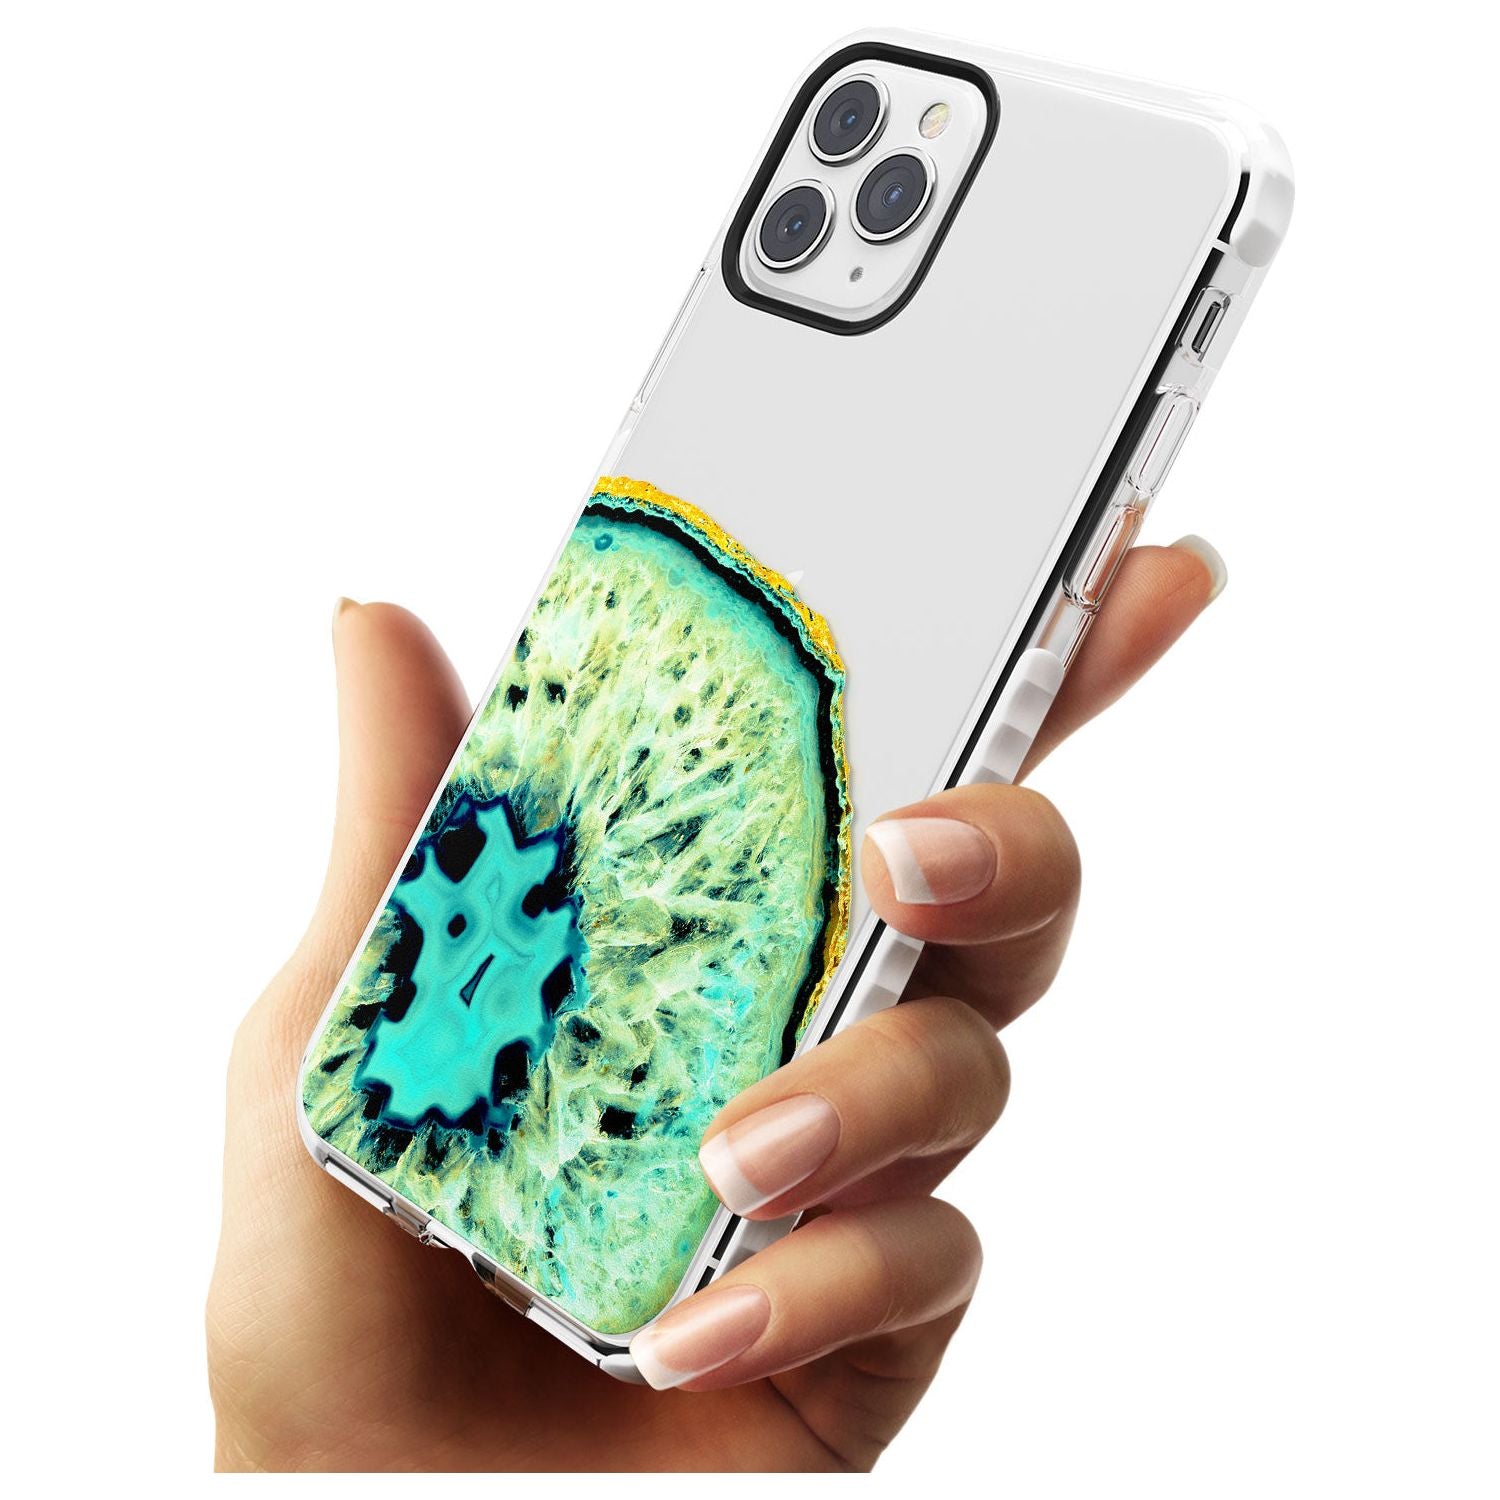 Turquoise & Green Gemstone Crystal Clear Design Impact Phone Case for iPhone 11 Pro Max